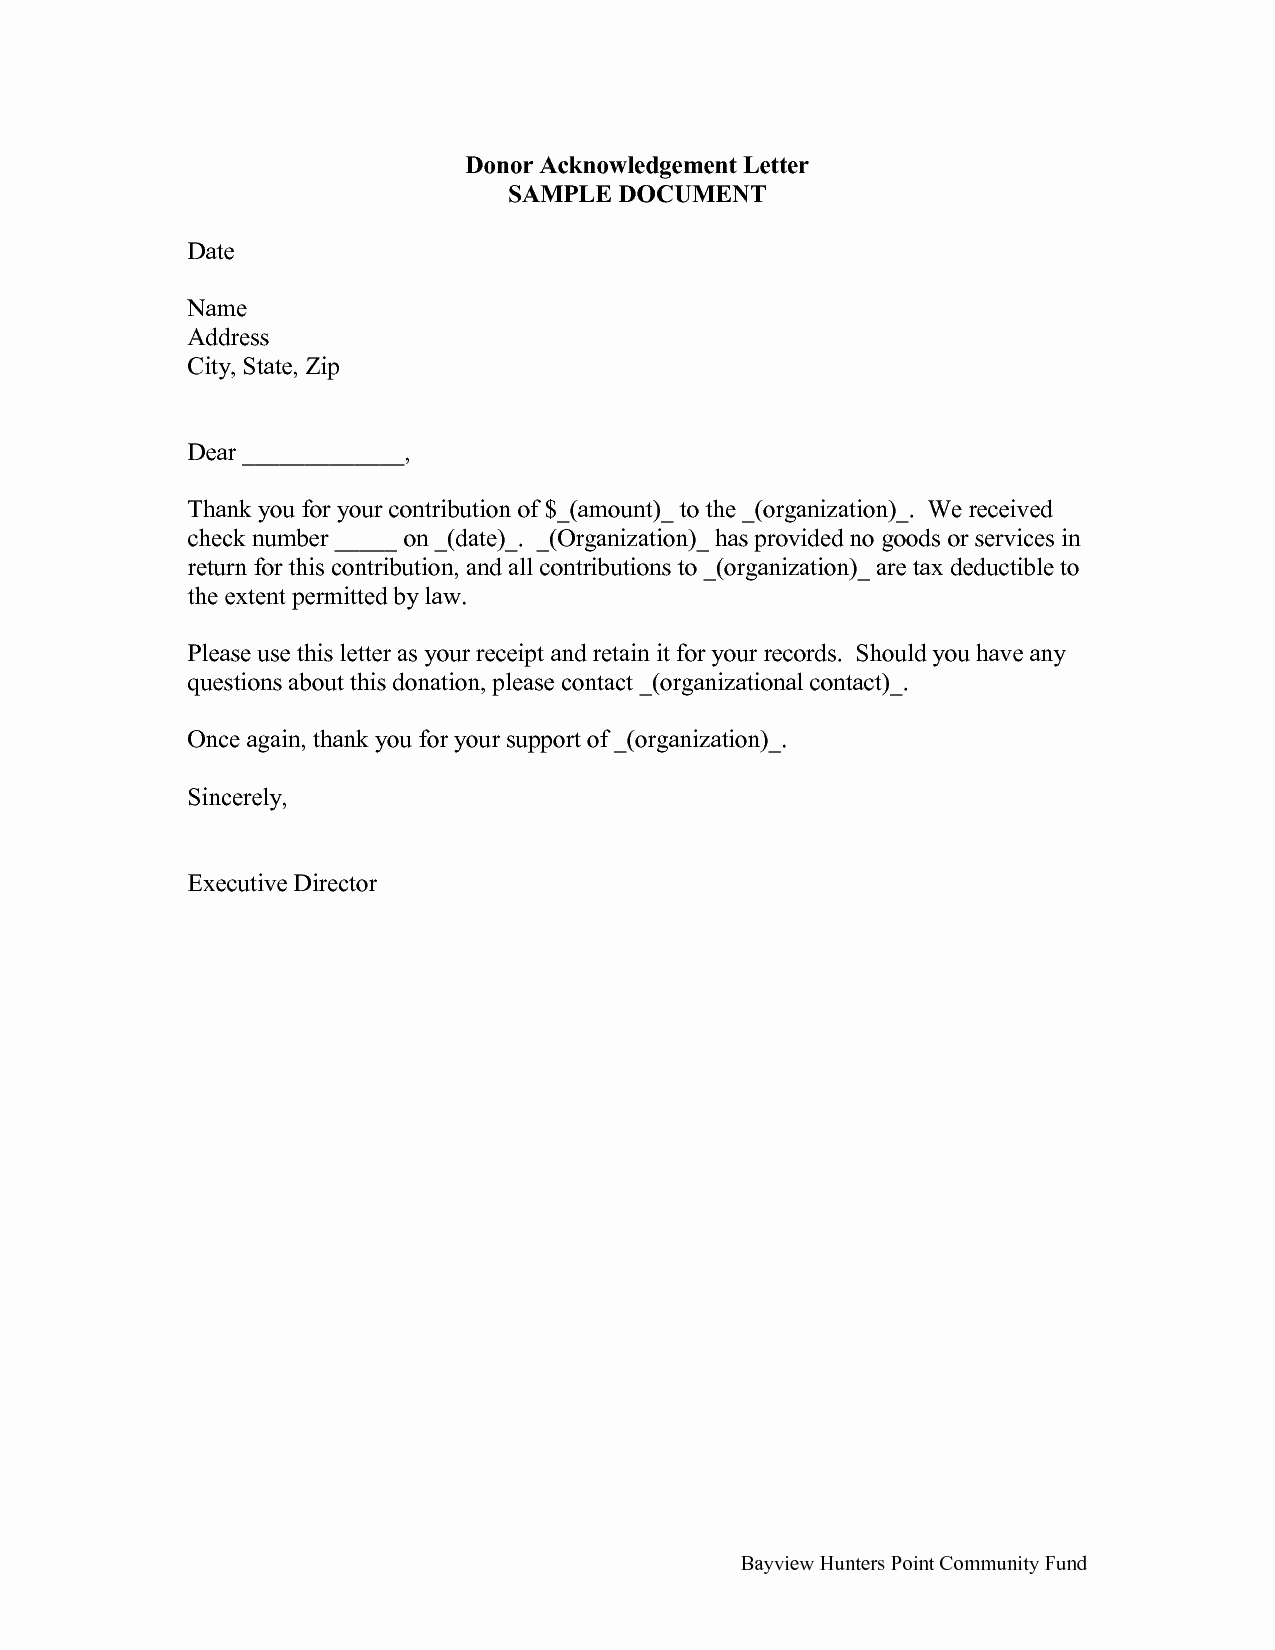 Format Acknowledgement Letter Best Template Collection